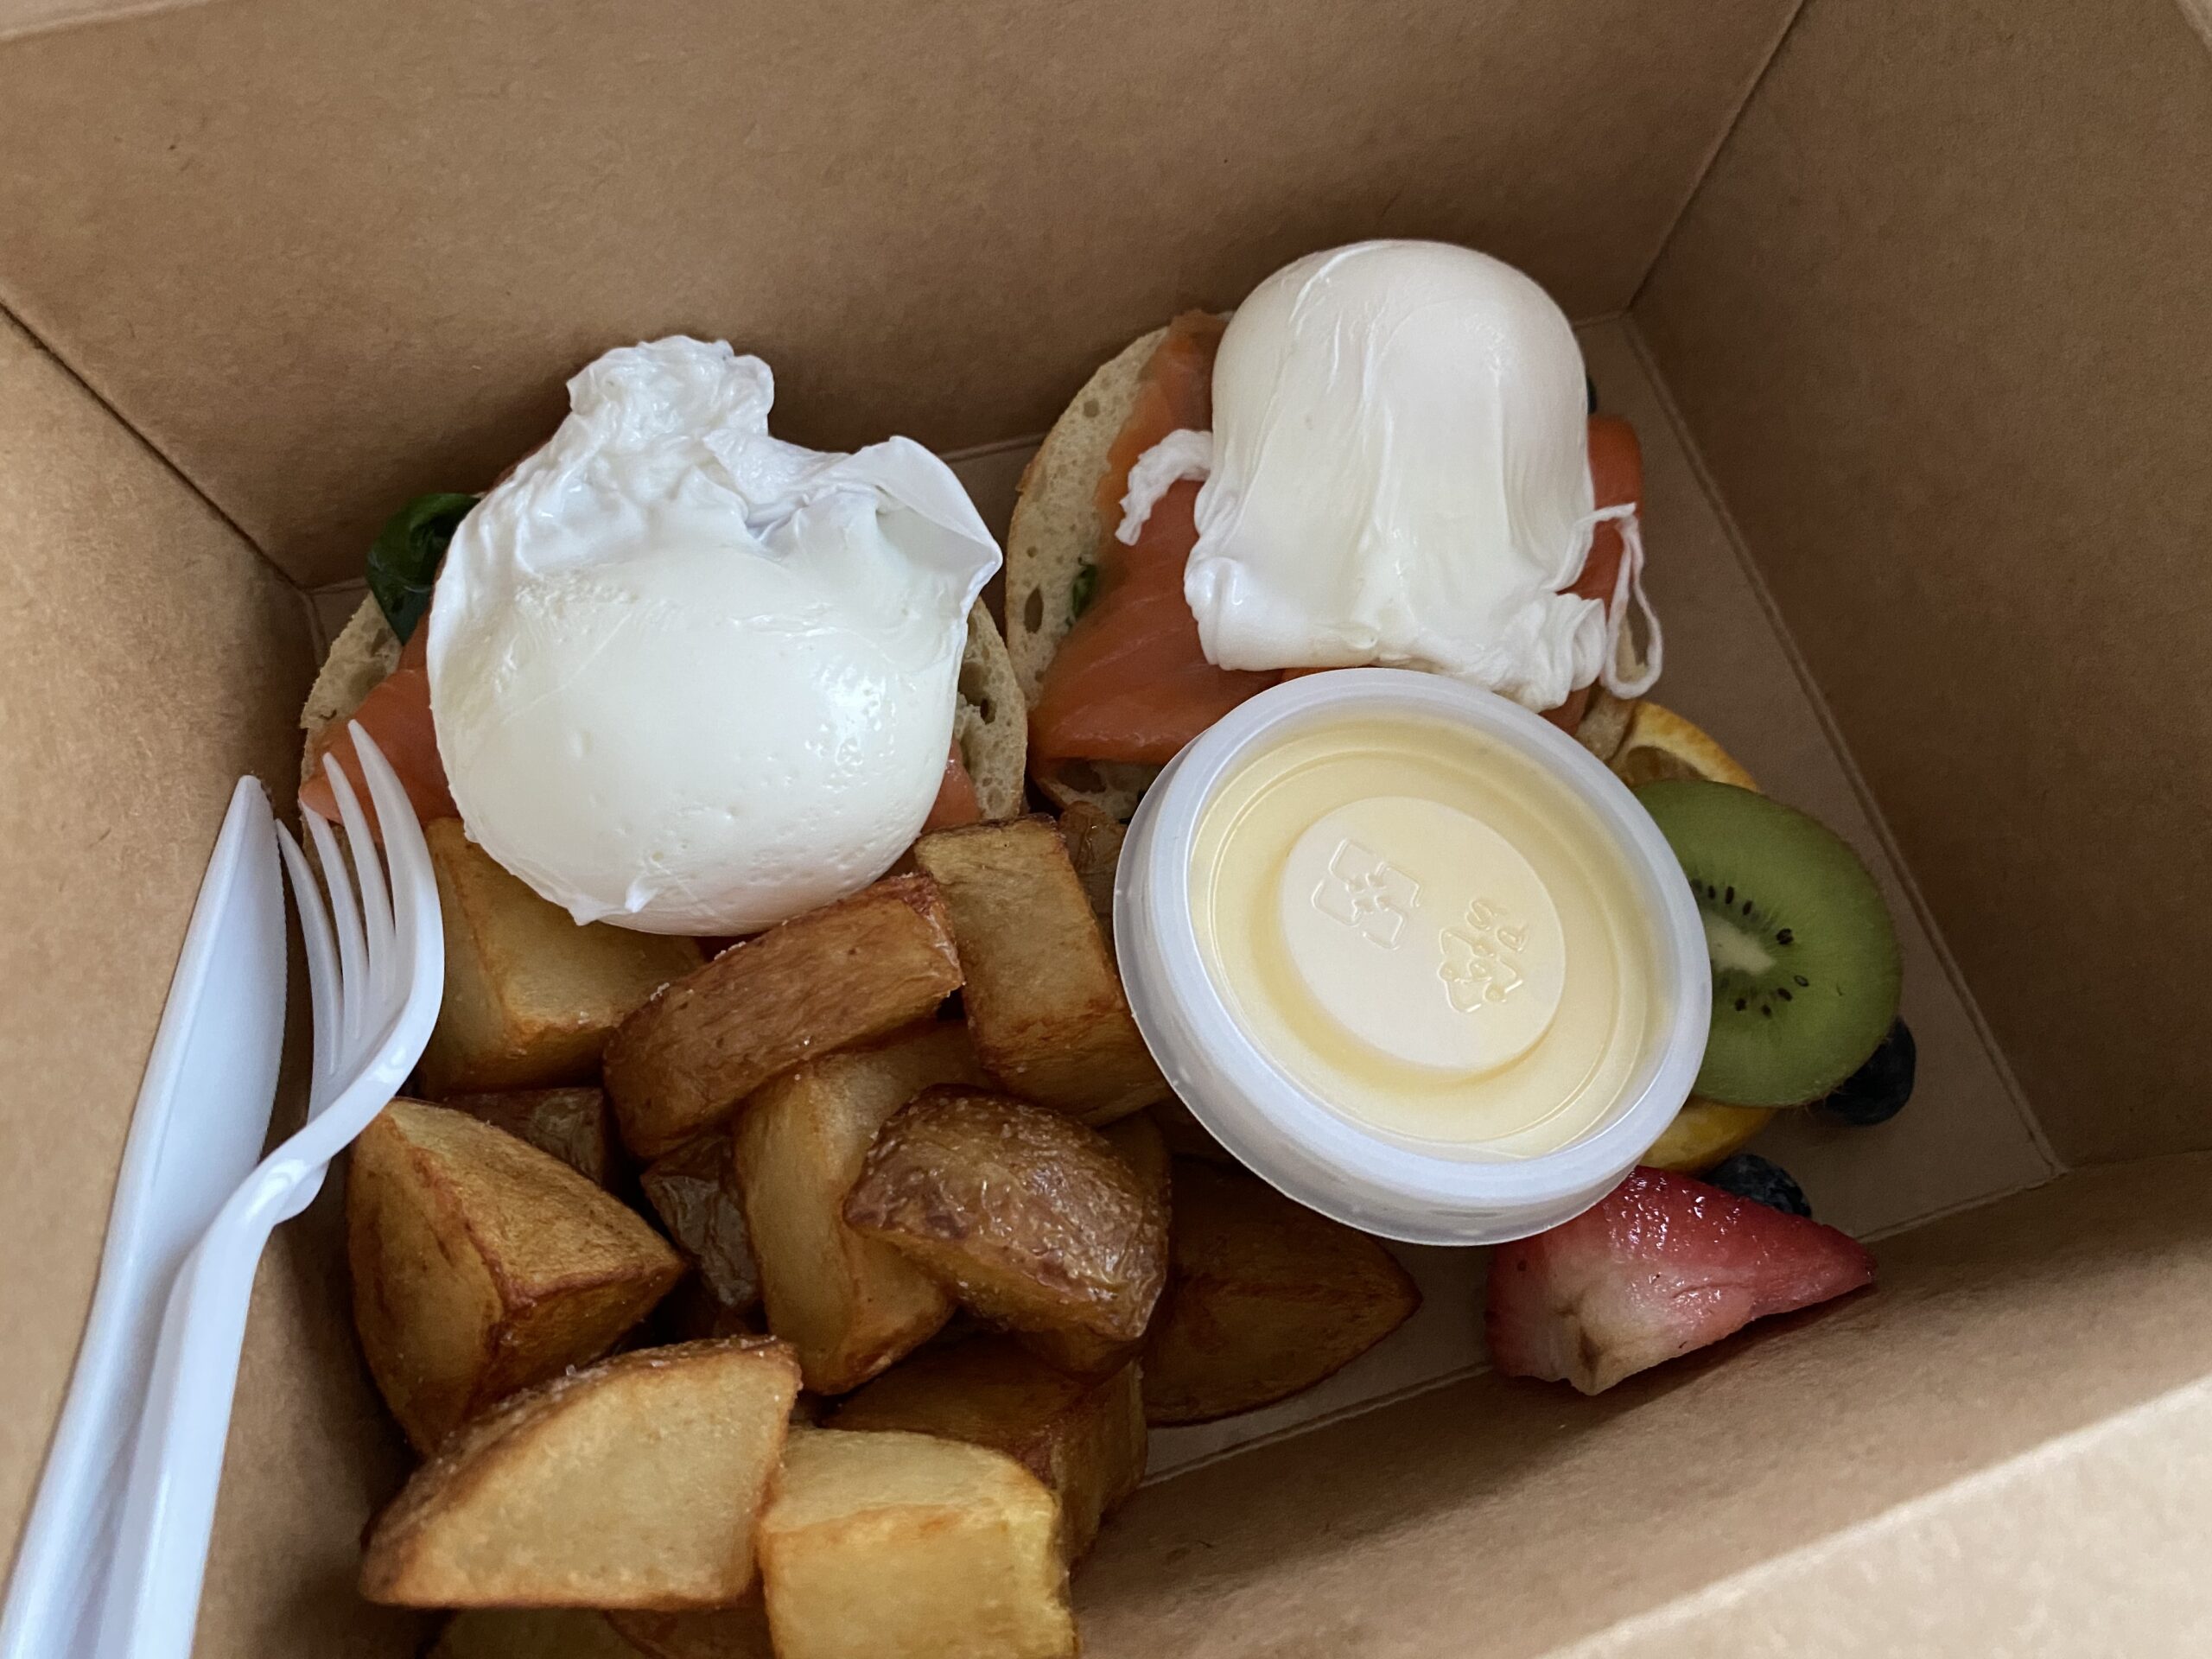 City staycation. Smoked salmon benny breakfast in a box at the Sheraton Vancouver Wall Centre hotel.